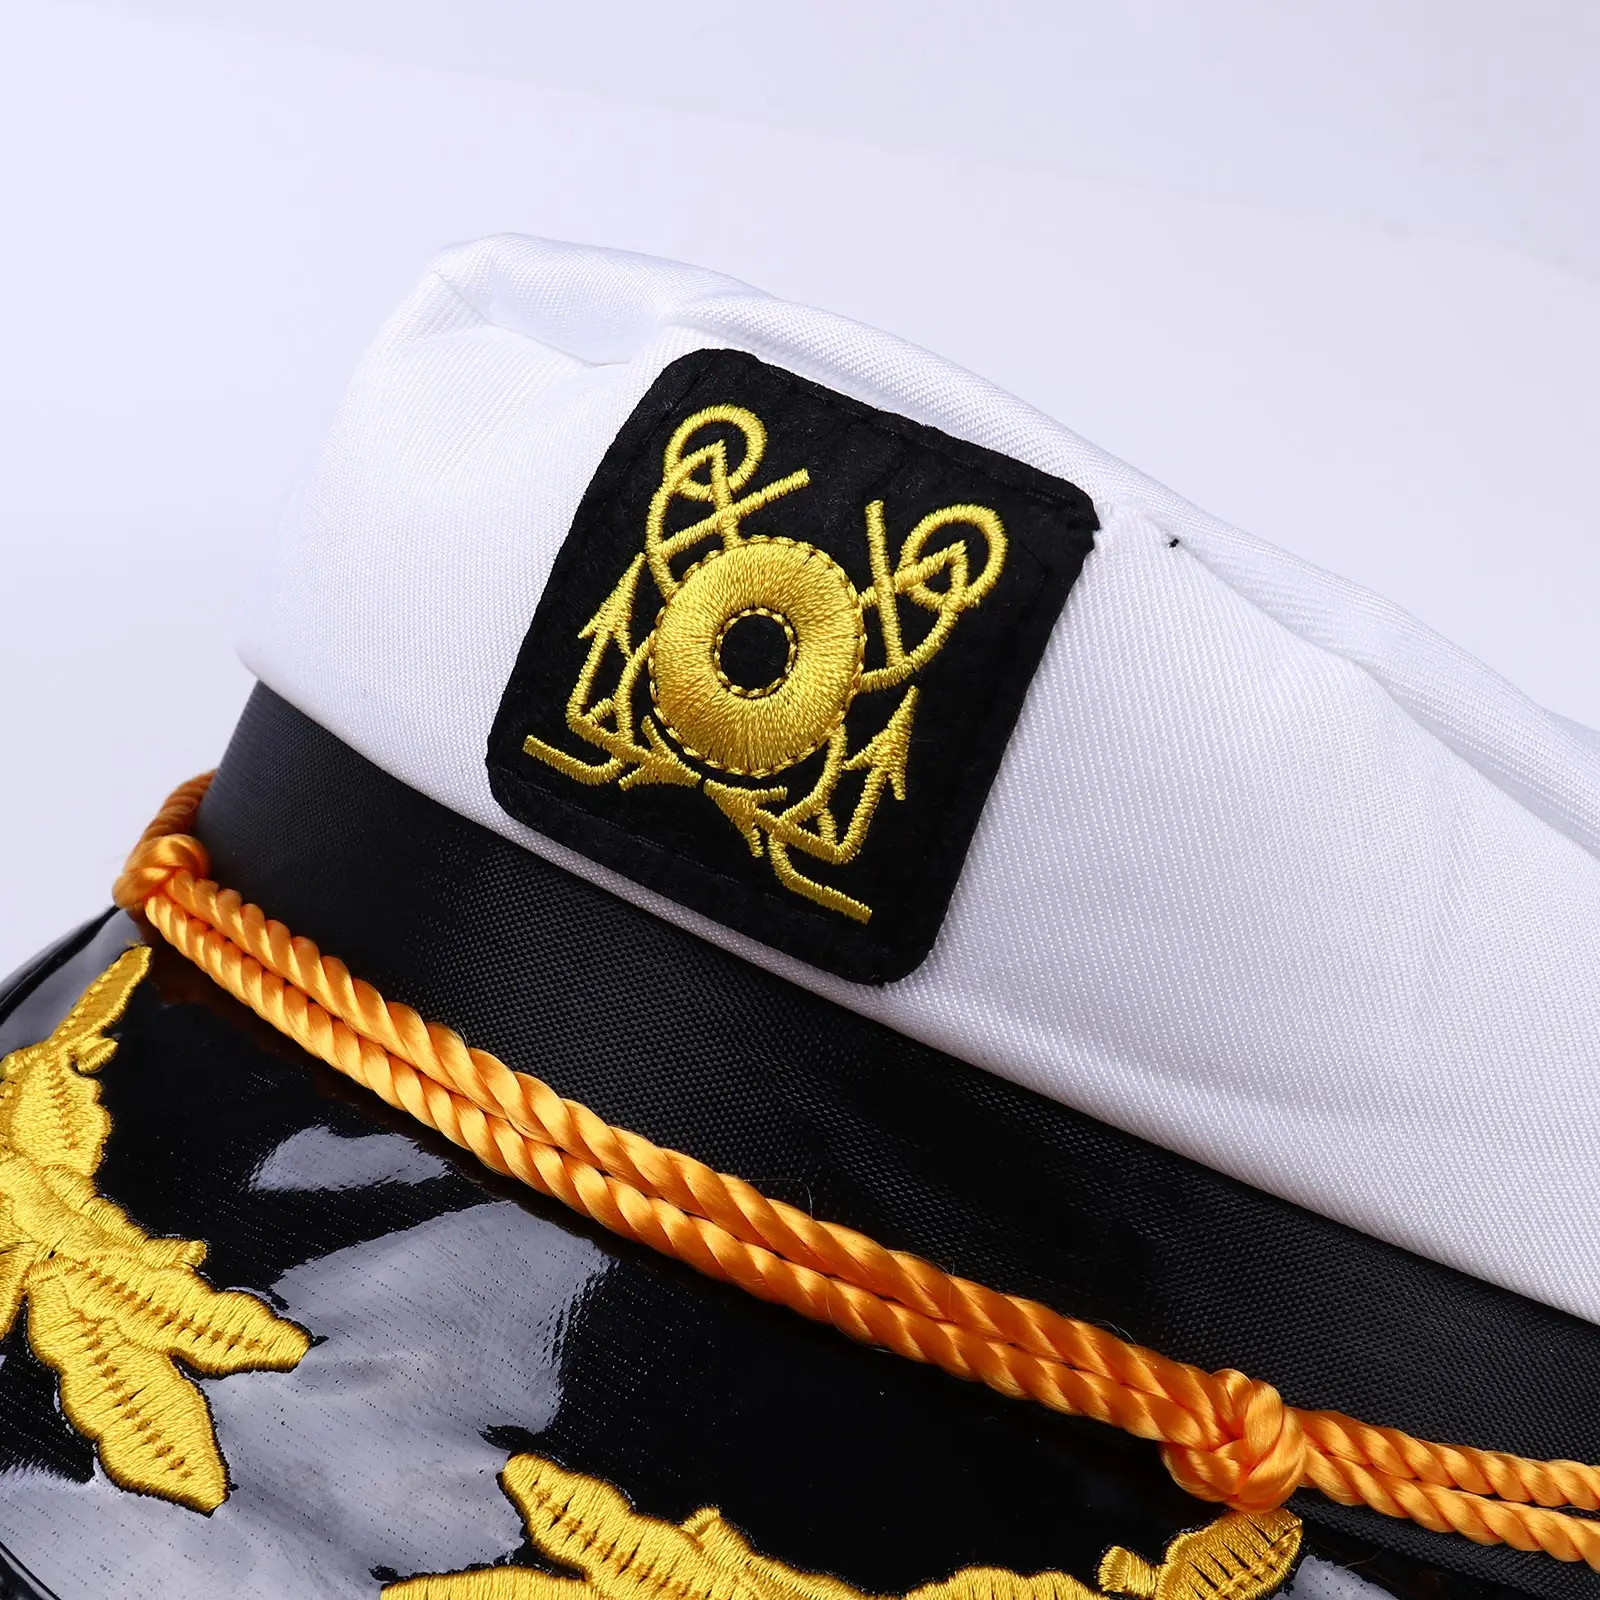 Men Yacht Captain Boating Hat Sailor Cap Aviator Sunglasses White Gloves  Set For Hollowen Party Cosplay Navy Costume Accessories - AliExpress